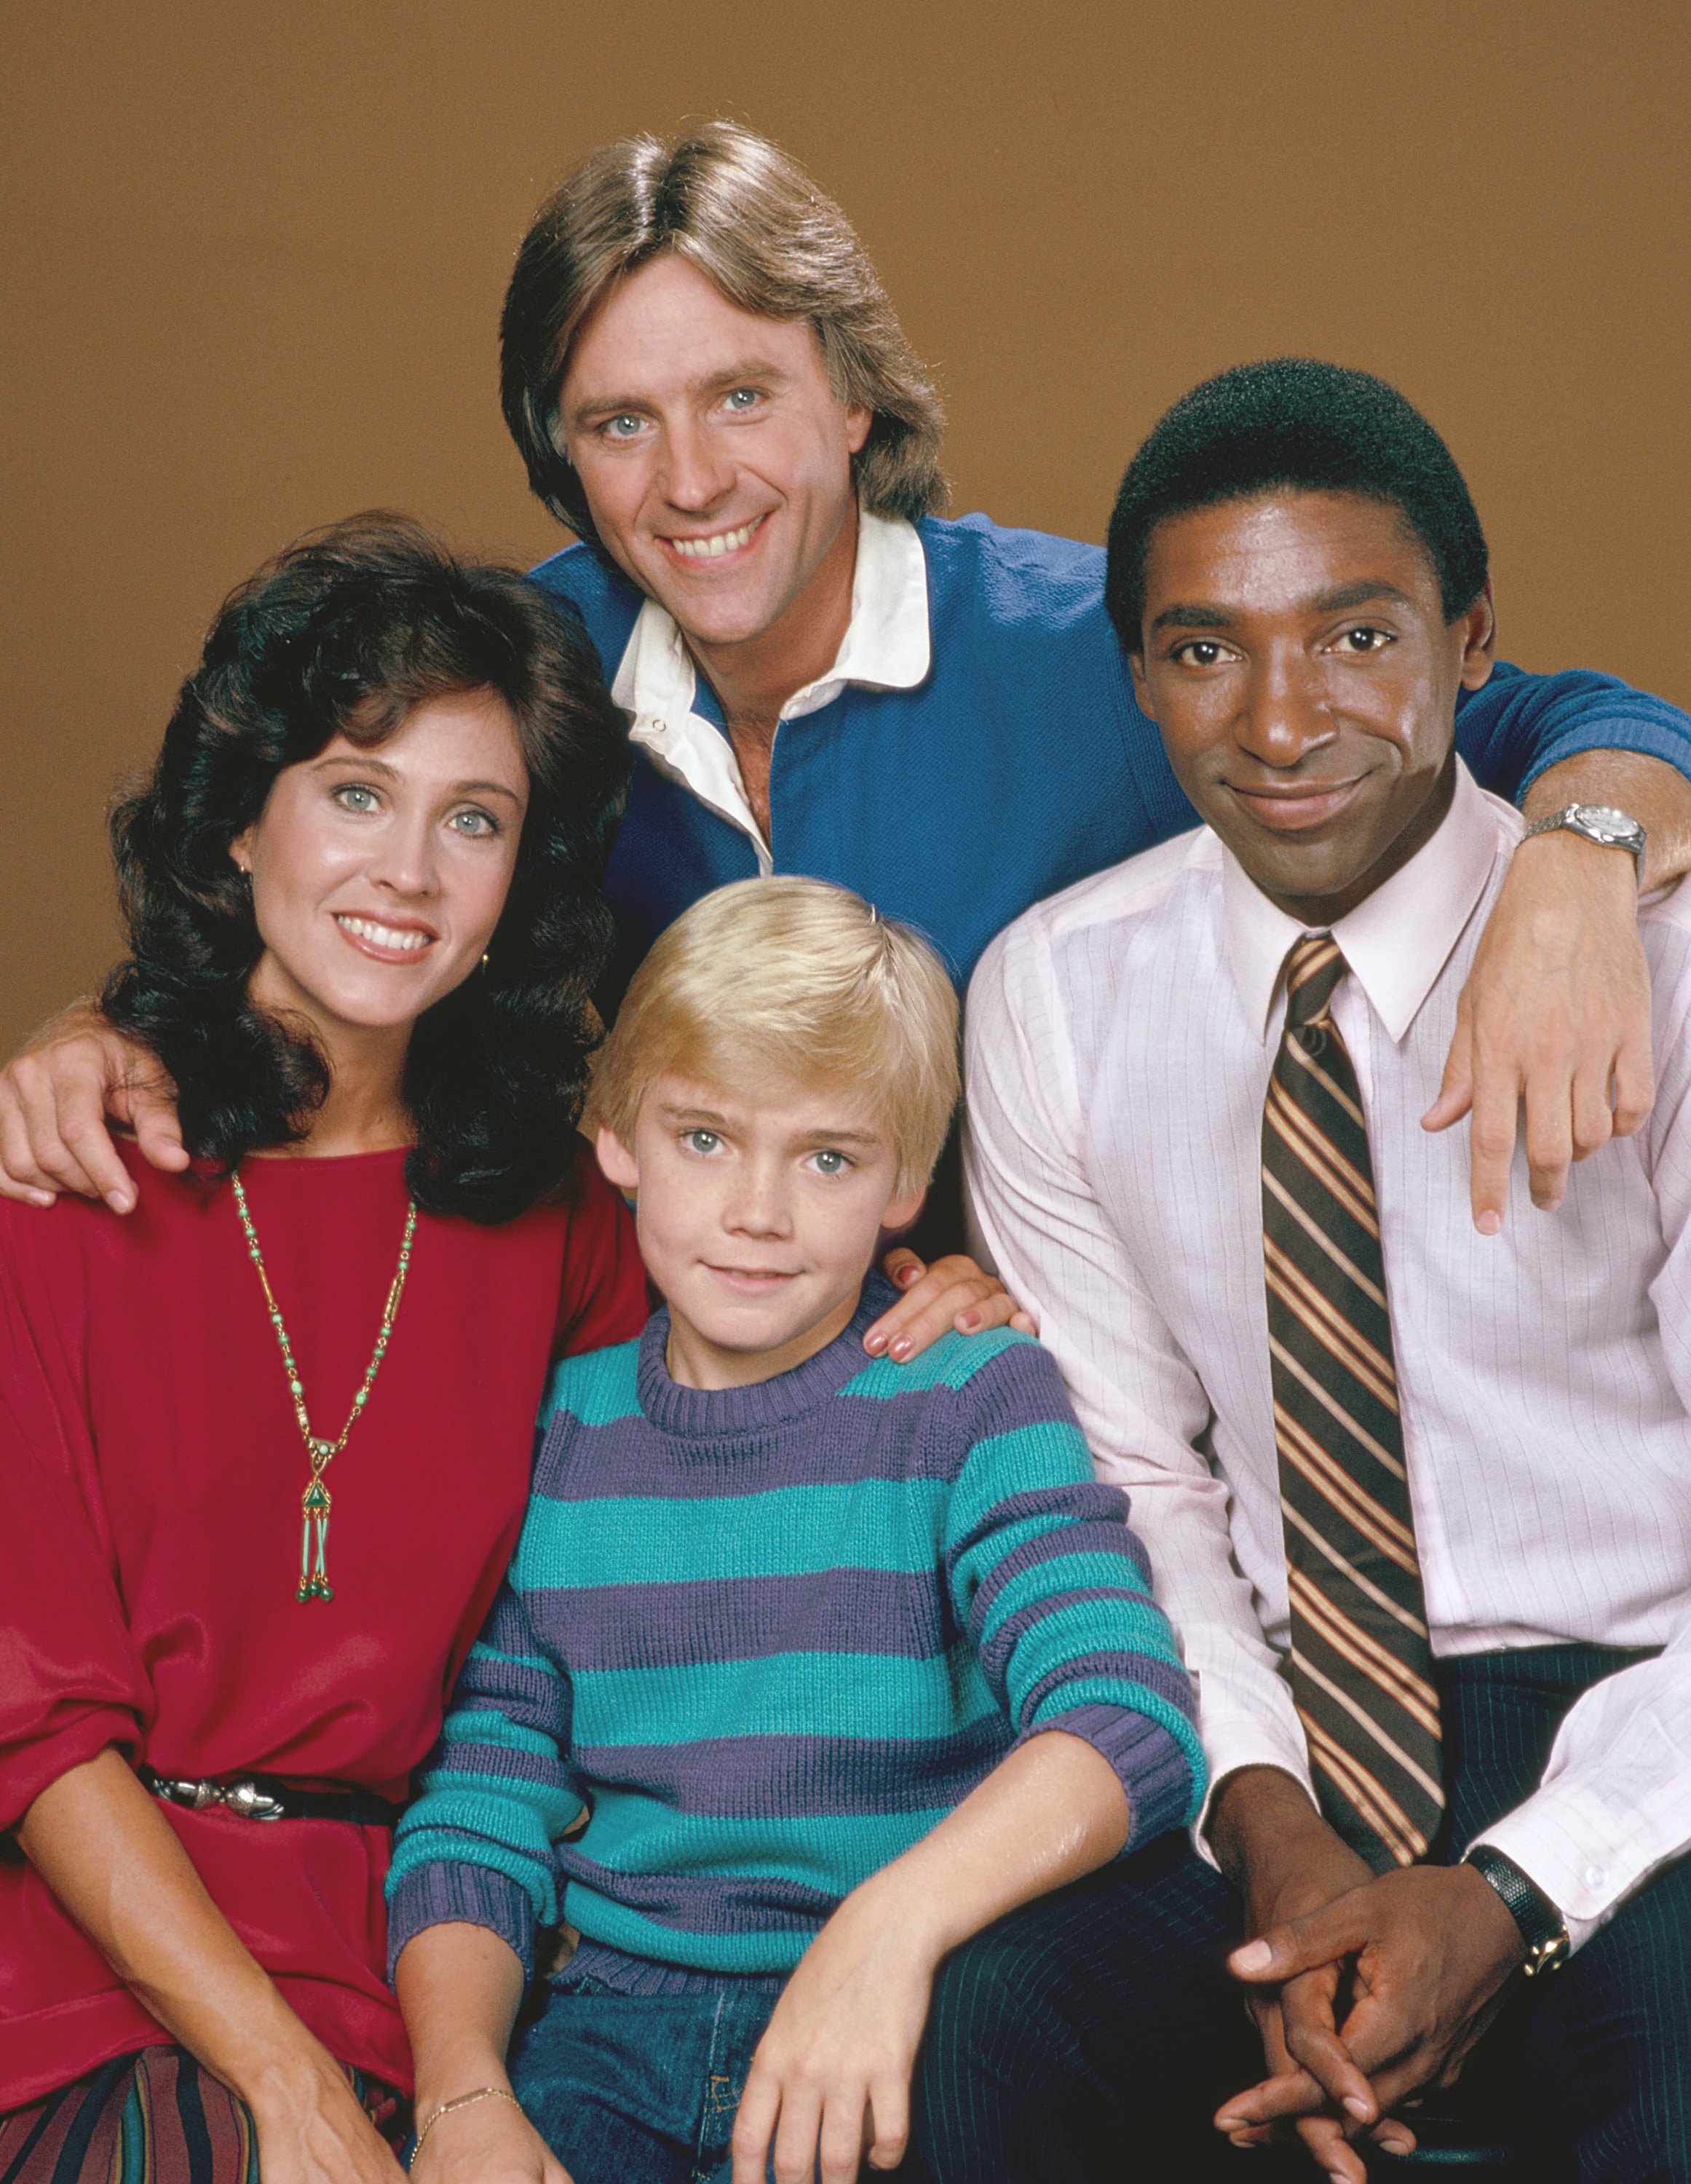 Erin Gray, Joel Higgins, Leonard Lightfoot, and Rick Schroder on the set of “Silver Spoons” on October 9, 2006 | Source: Getty Images